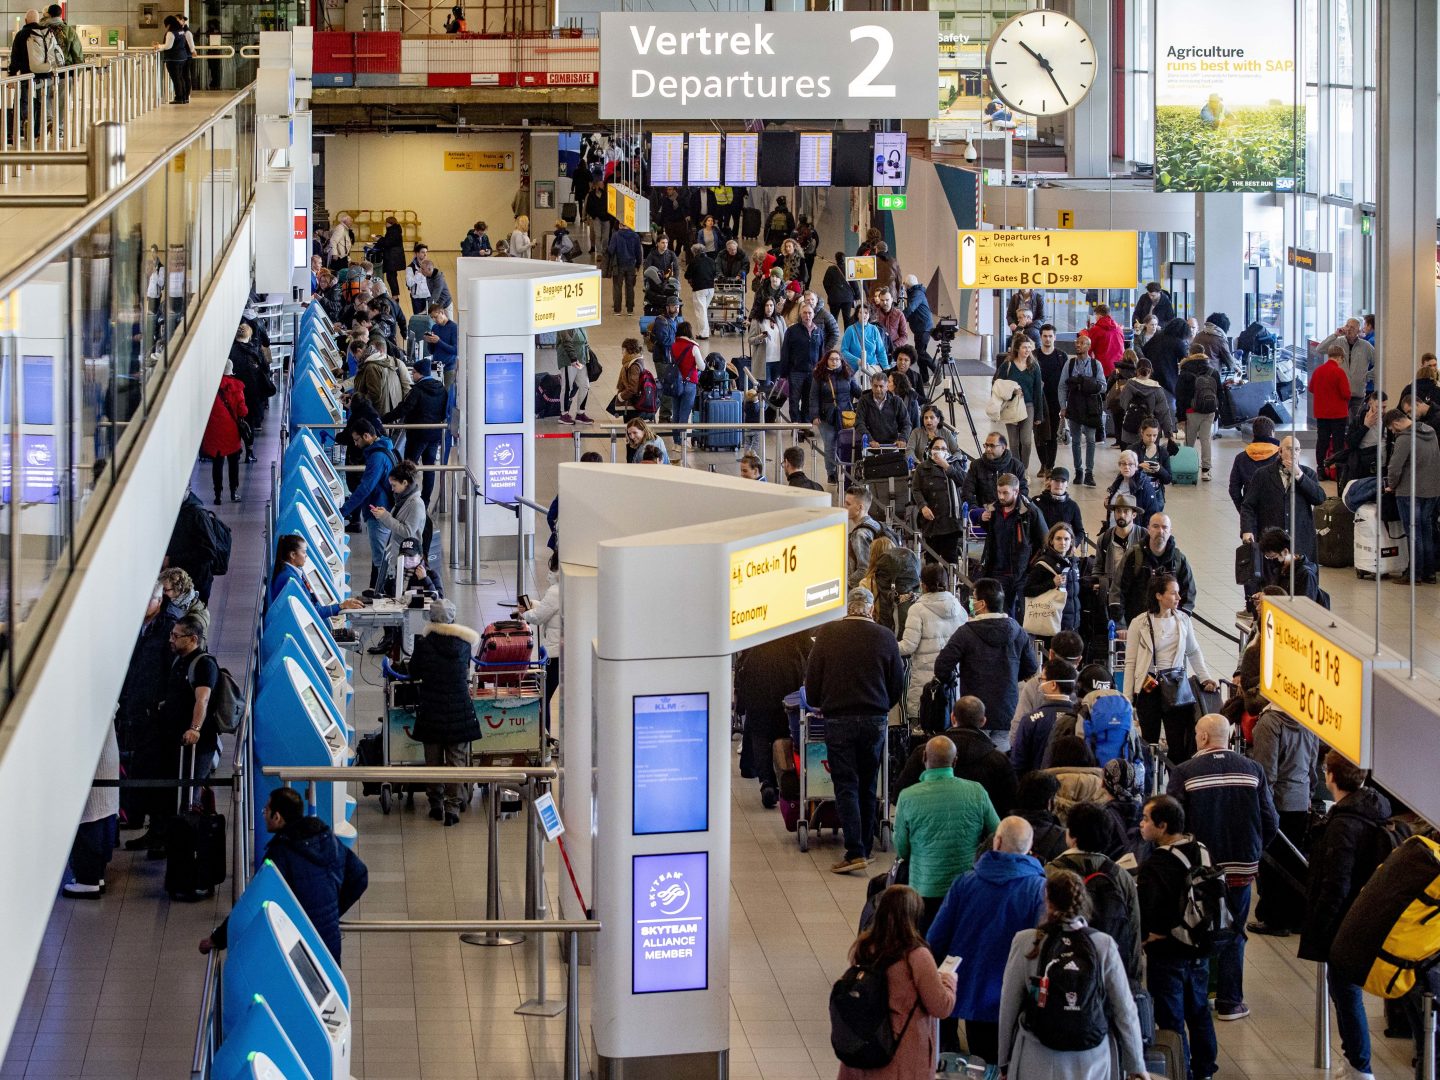 Passengers hoping to change their flights to the U.S. wait in long lines at the Schiphol Airport in the Netherlands, after President Trump announced new restrictions on travel from  Europe.